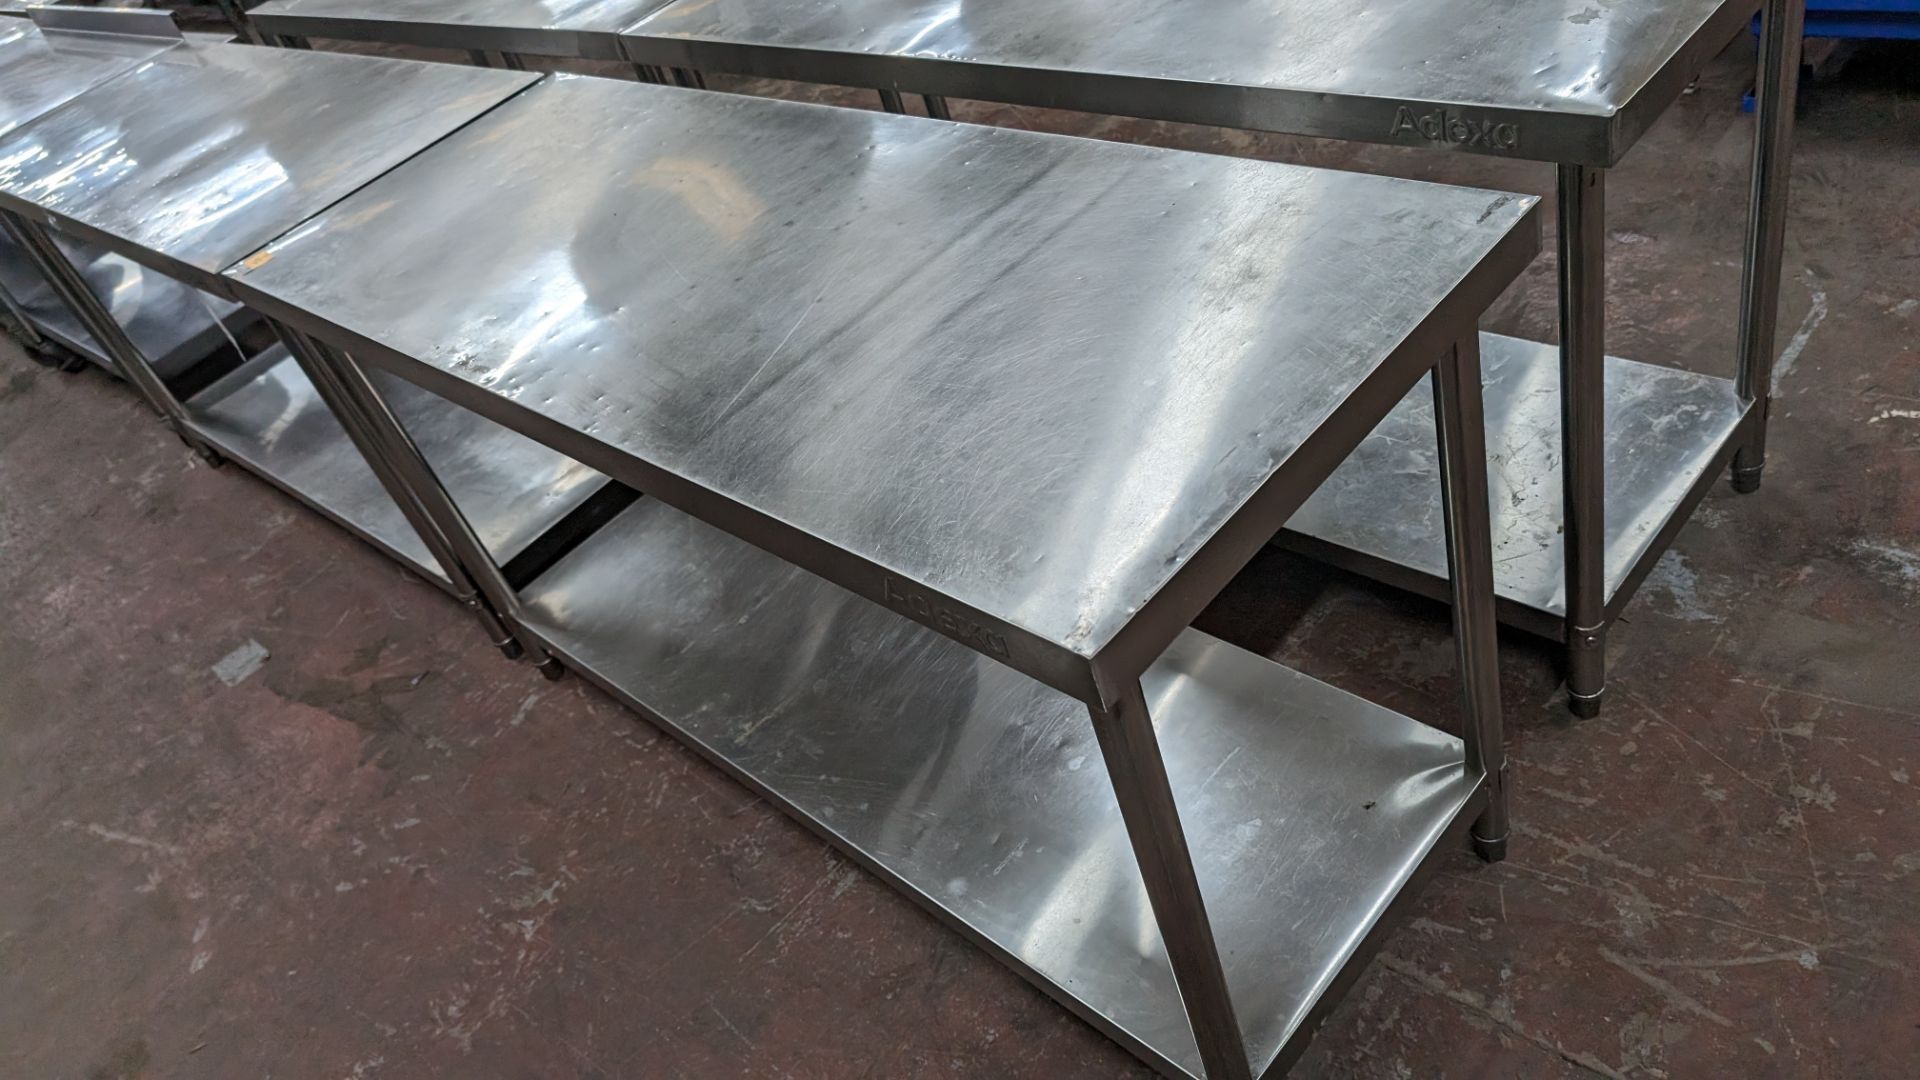 Adexa stainless steel twin tier table, max dimensions 1600 x 600 x 860mm - Image 3 of 3